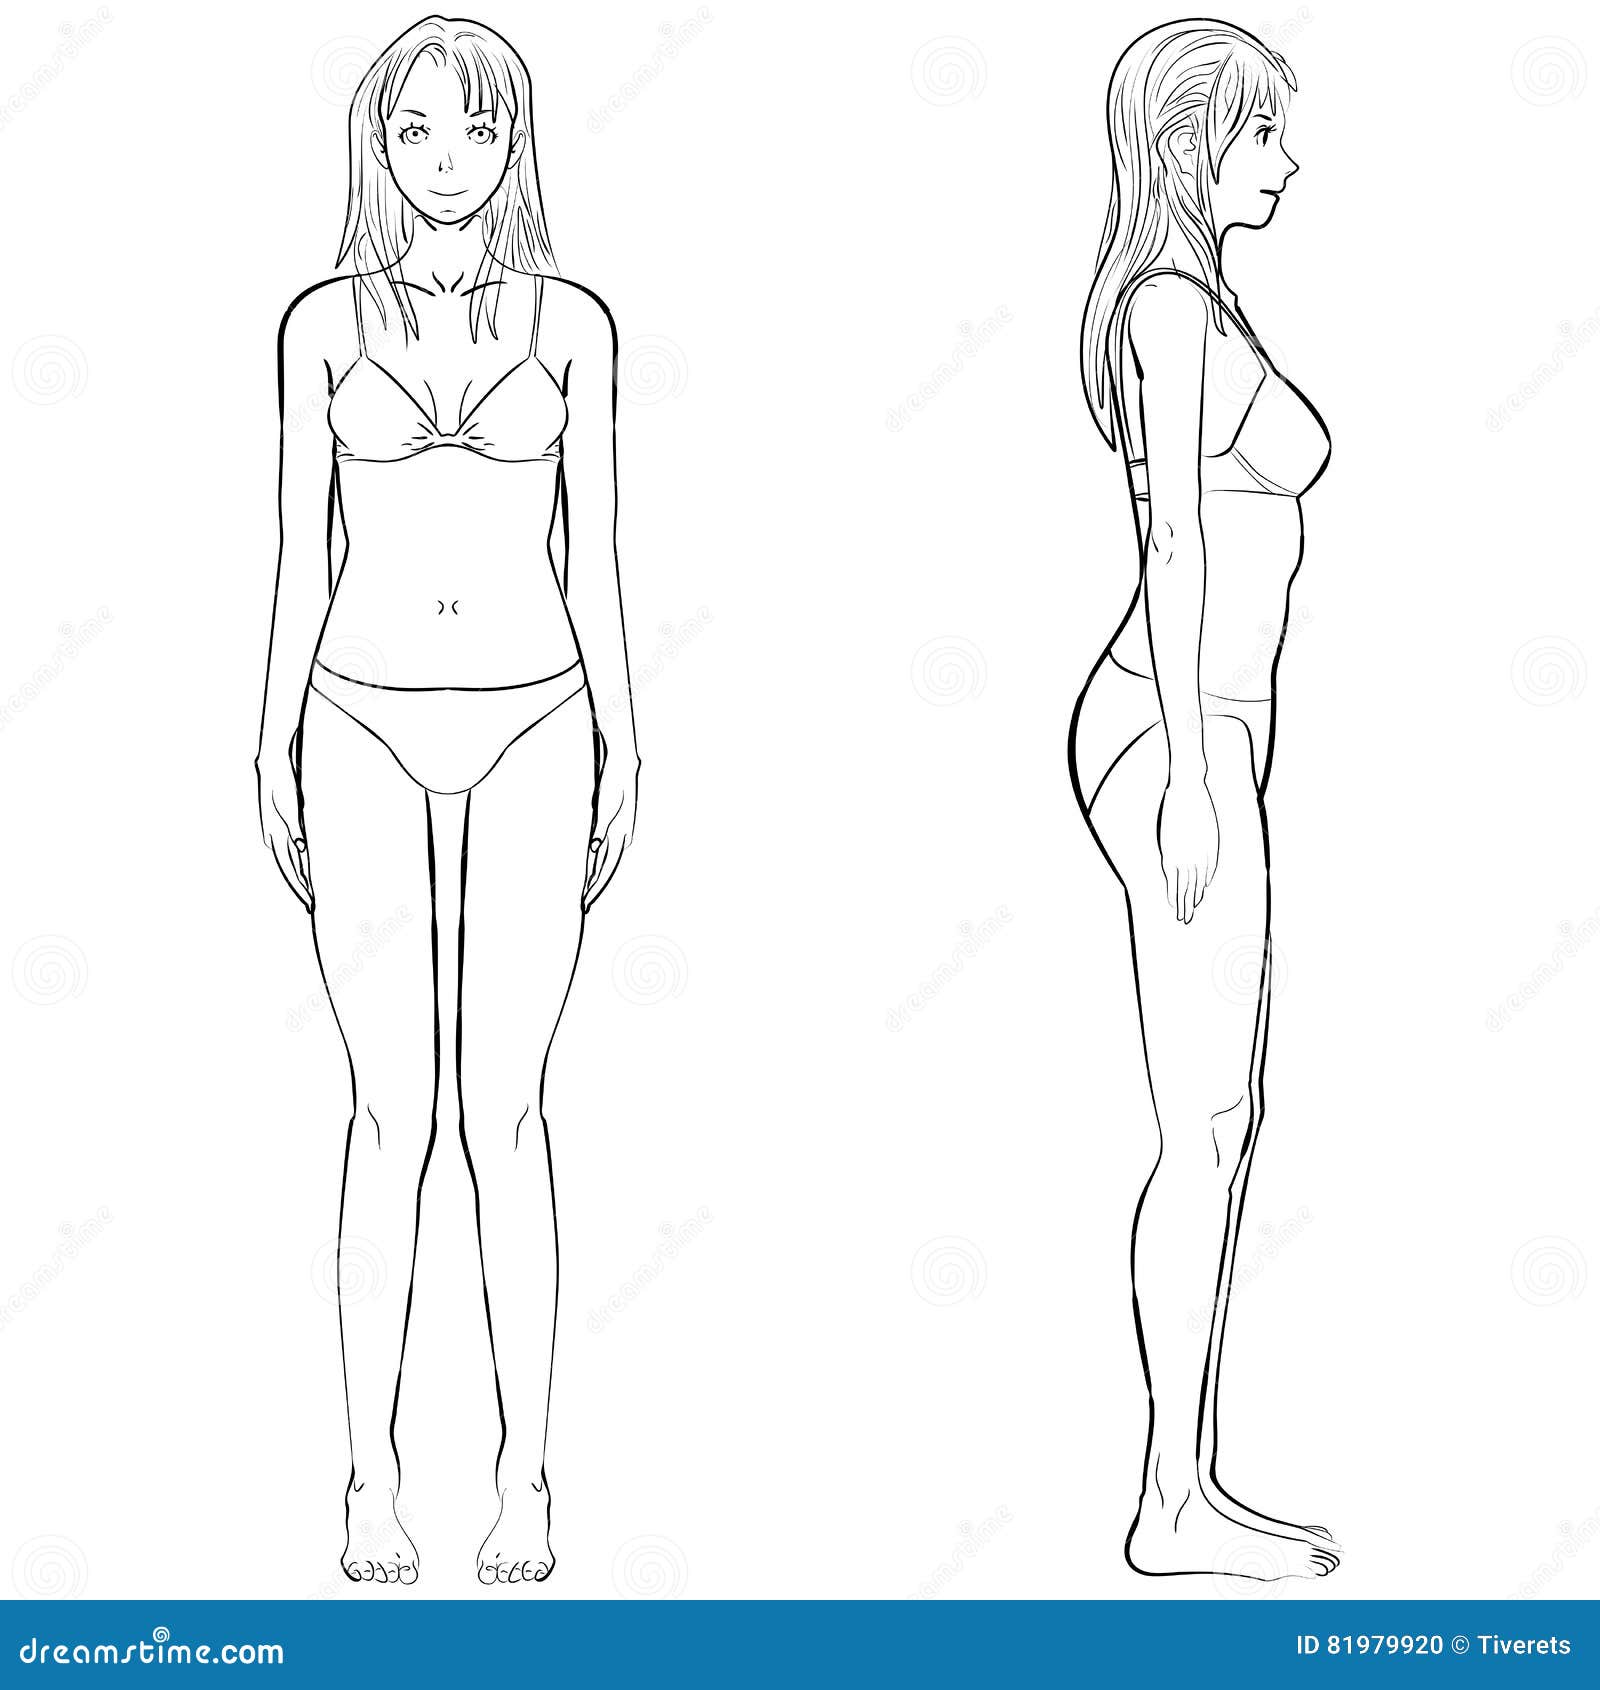 How to Draw a Manga Boy Full Body (Side View) || Step-by-Step Pictures –  How 2 Draw Manga